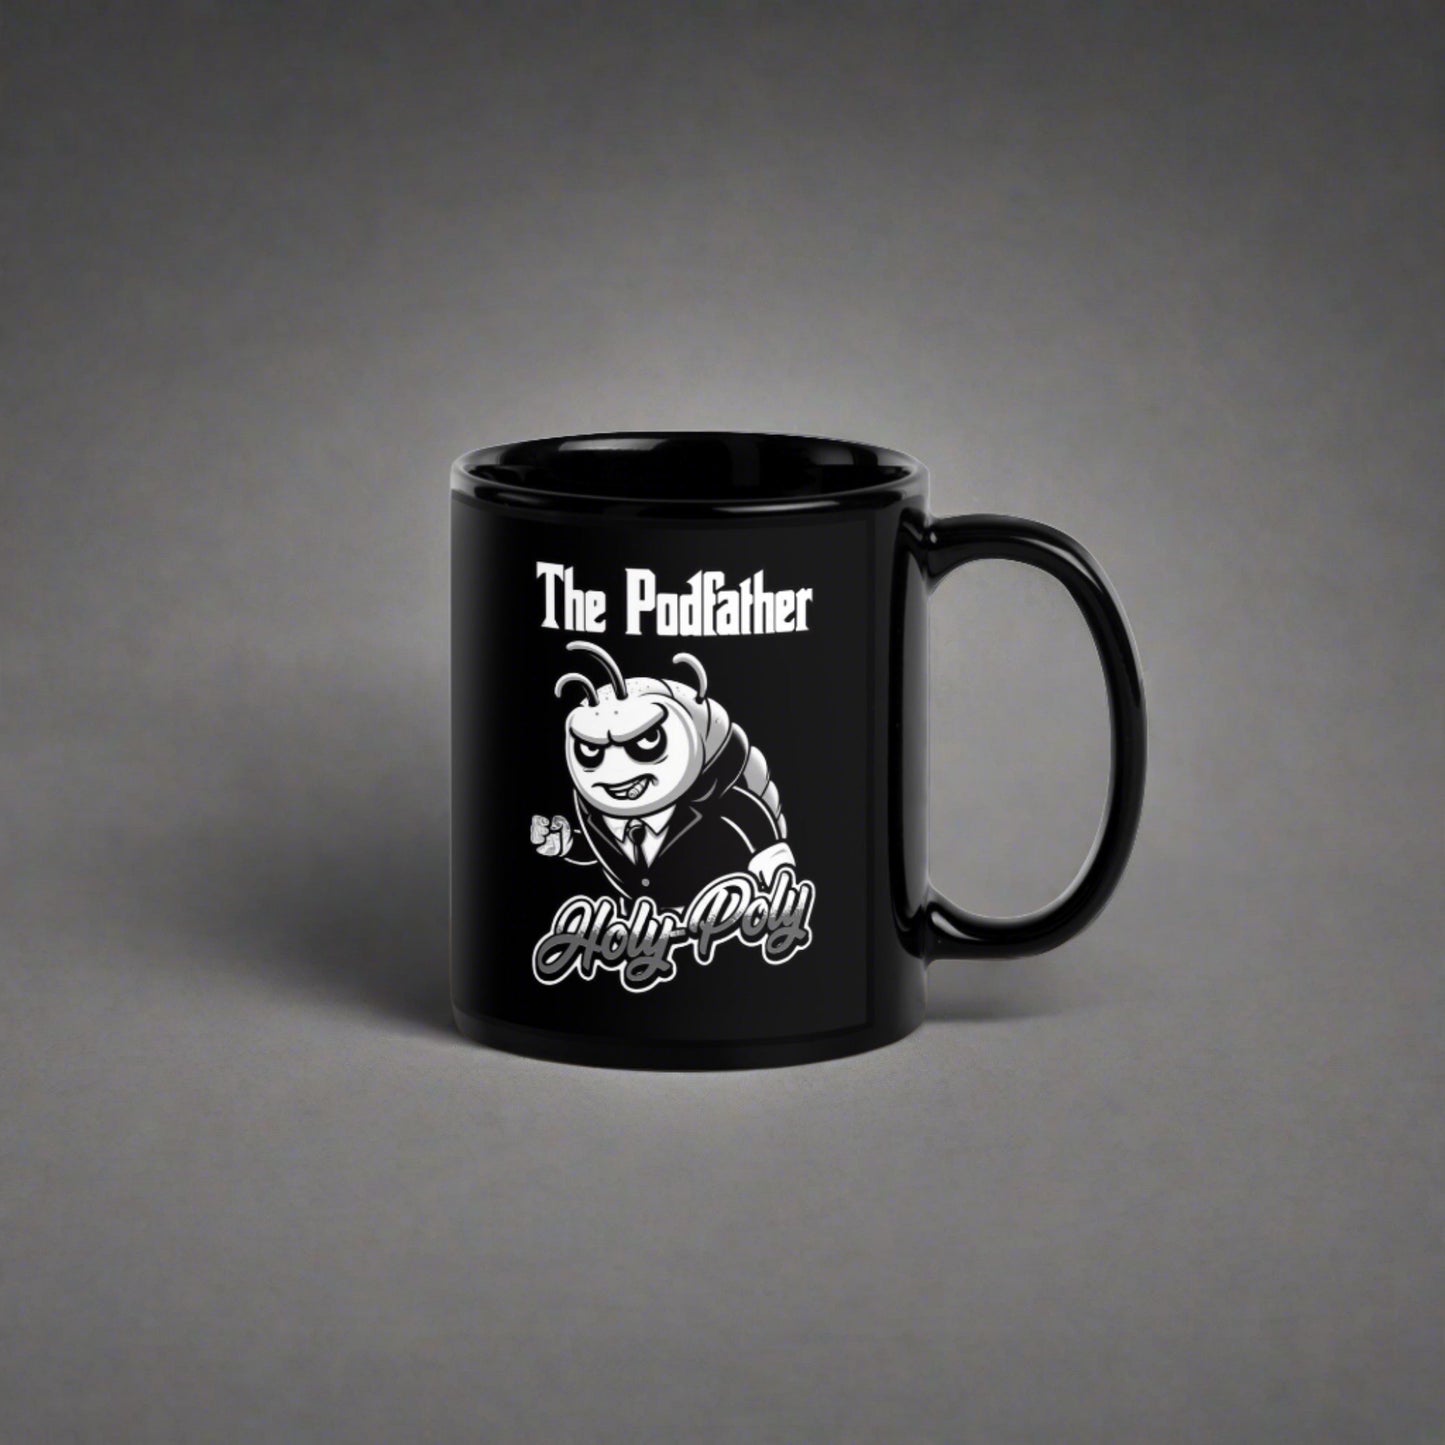 Holy-Poly Isopods exclusive "The Podfather" gangster mobster b&w black white funny ceramic mug hot coffee tea cup